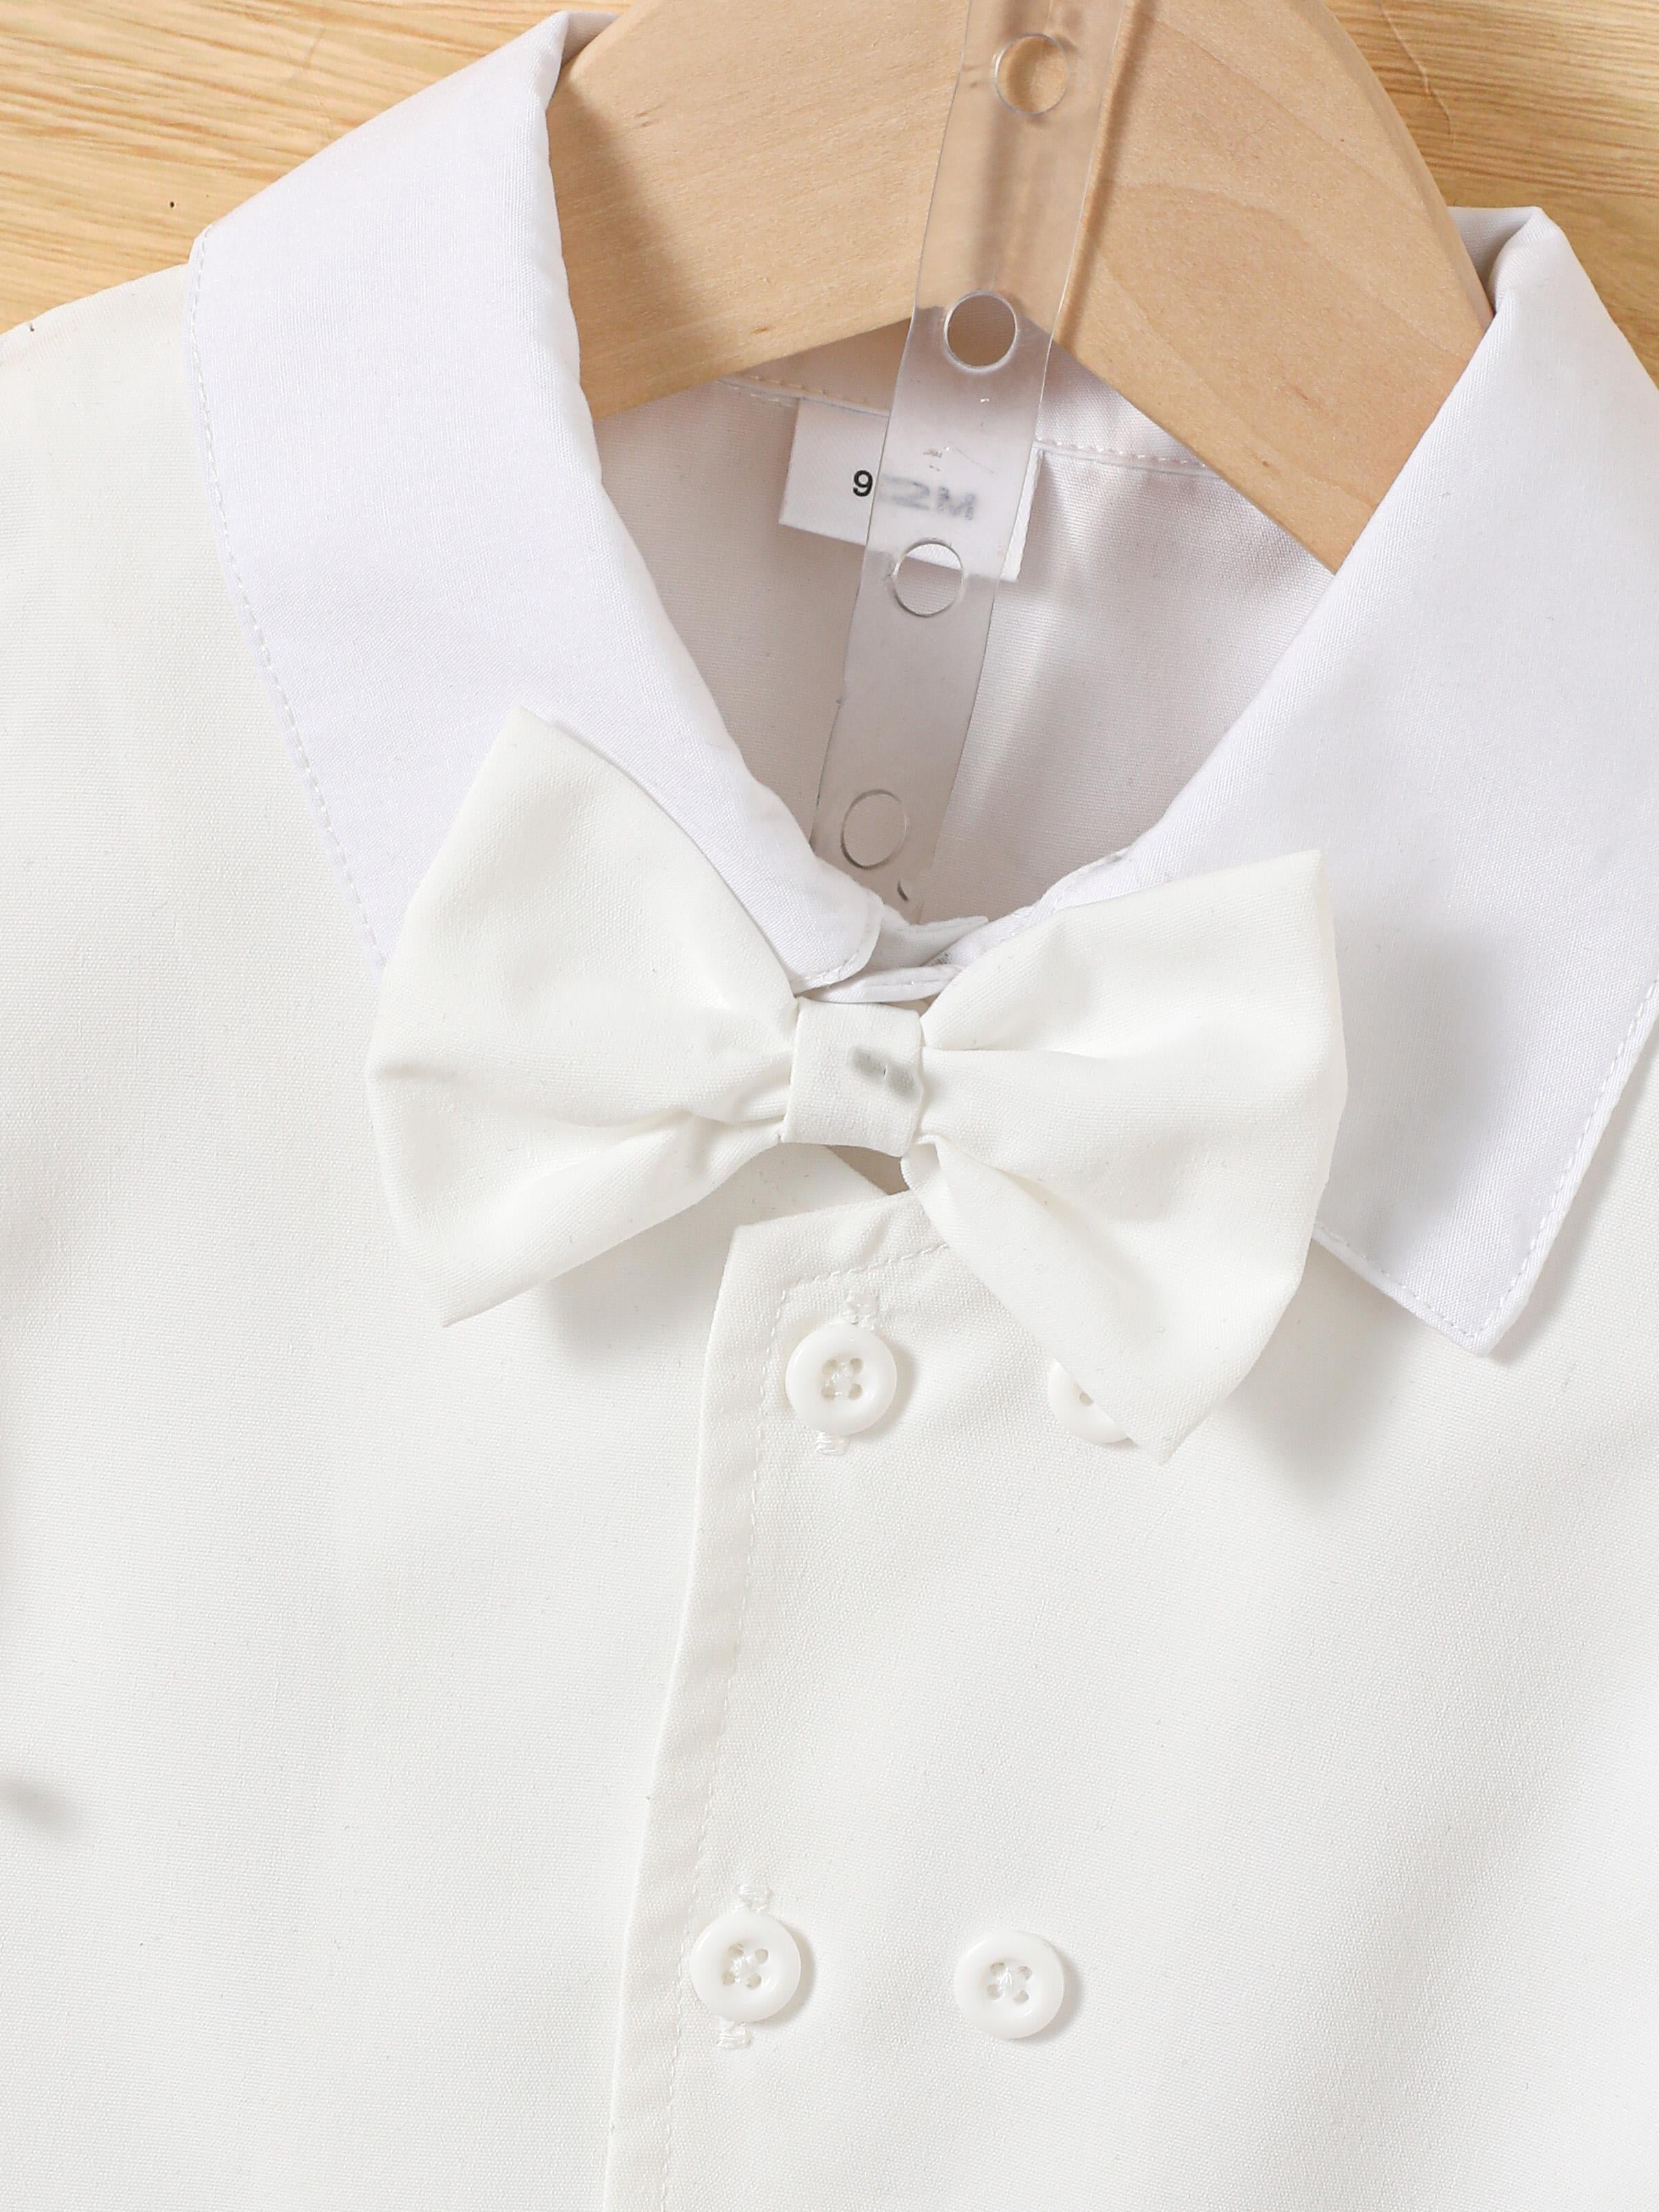 3-18M Ready Stock Baby Boys Gentle Outfits Turn-down Collar Bow Tie Shirt Vest Shorts 3Pcs Clothes Sets White For Christening Catpapa 462307162